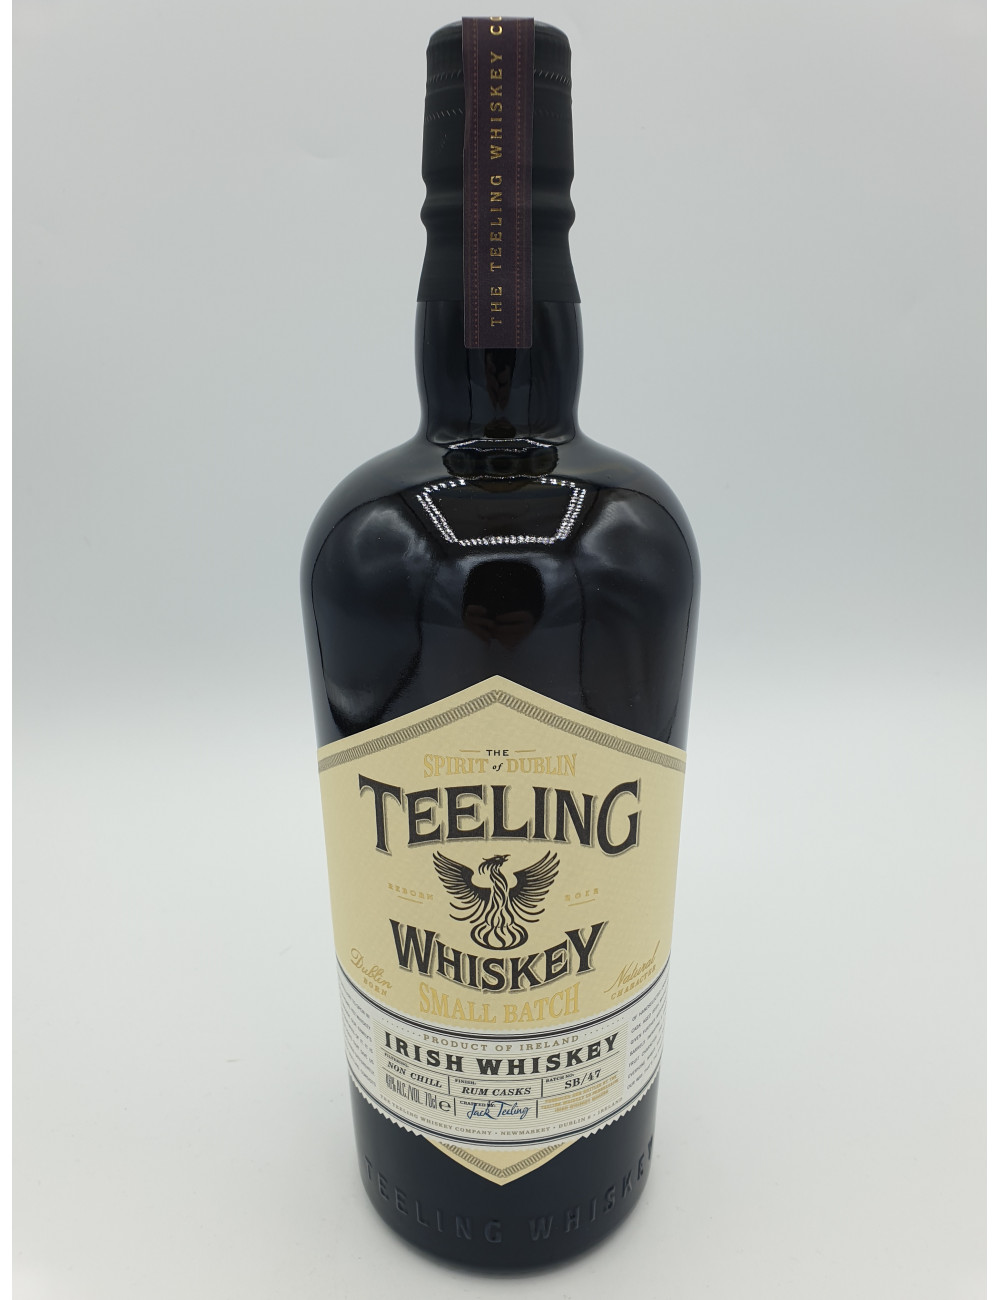 WHISKEY TEELING SMALL BATCH BLENDED  46°